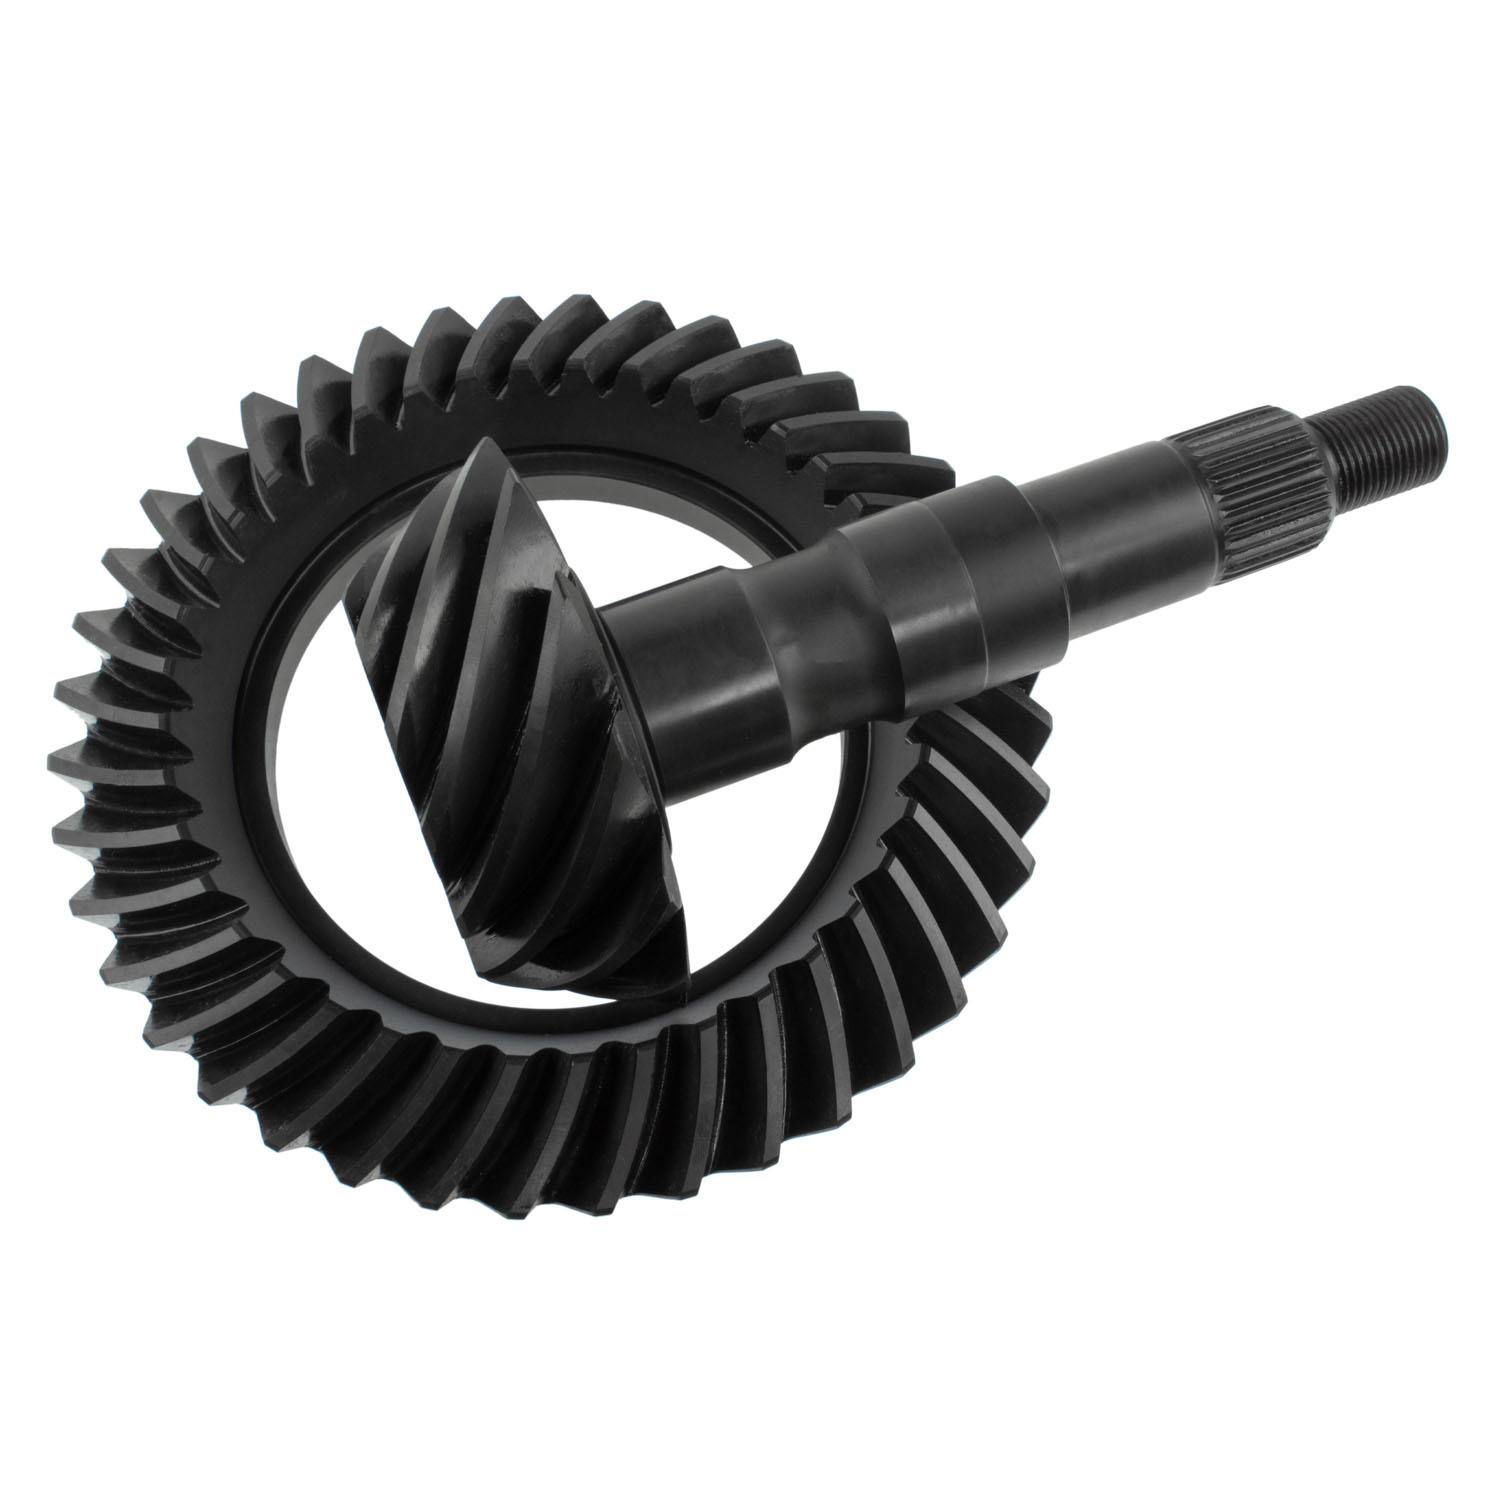 Richmond Gear GM85308 - Ring and Pinion, Excel, 3.08 Ratio, 30 Spline Pinion, 3 Series, 8.5 in / 8.6 in, GM 10-Bolt, Kit